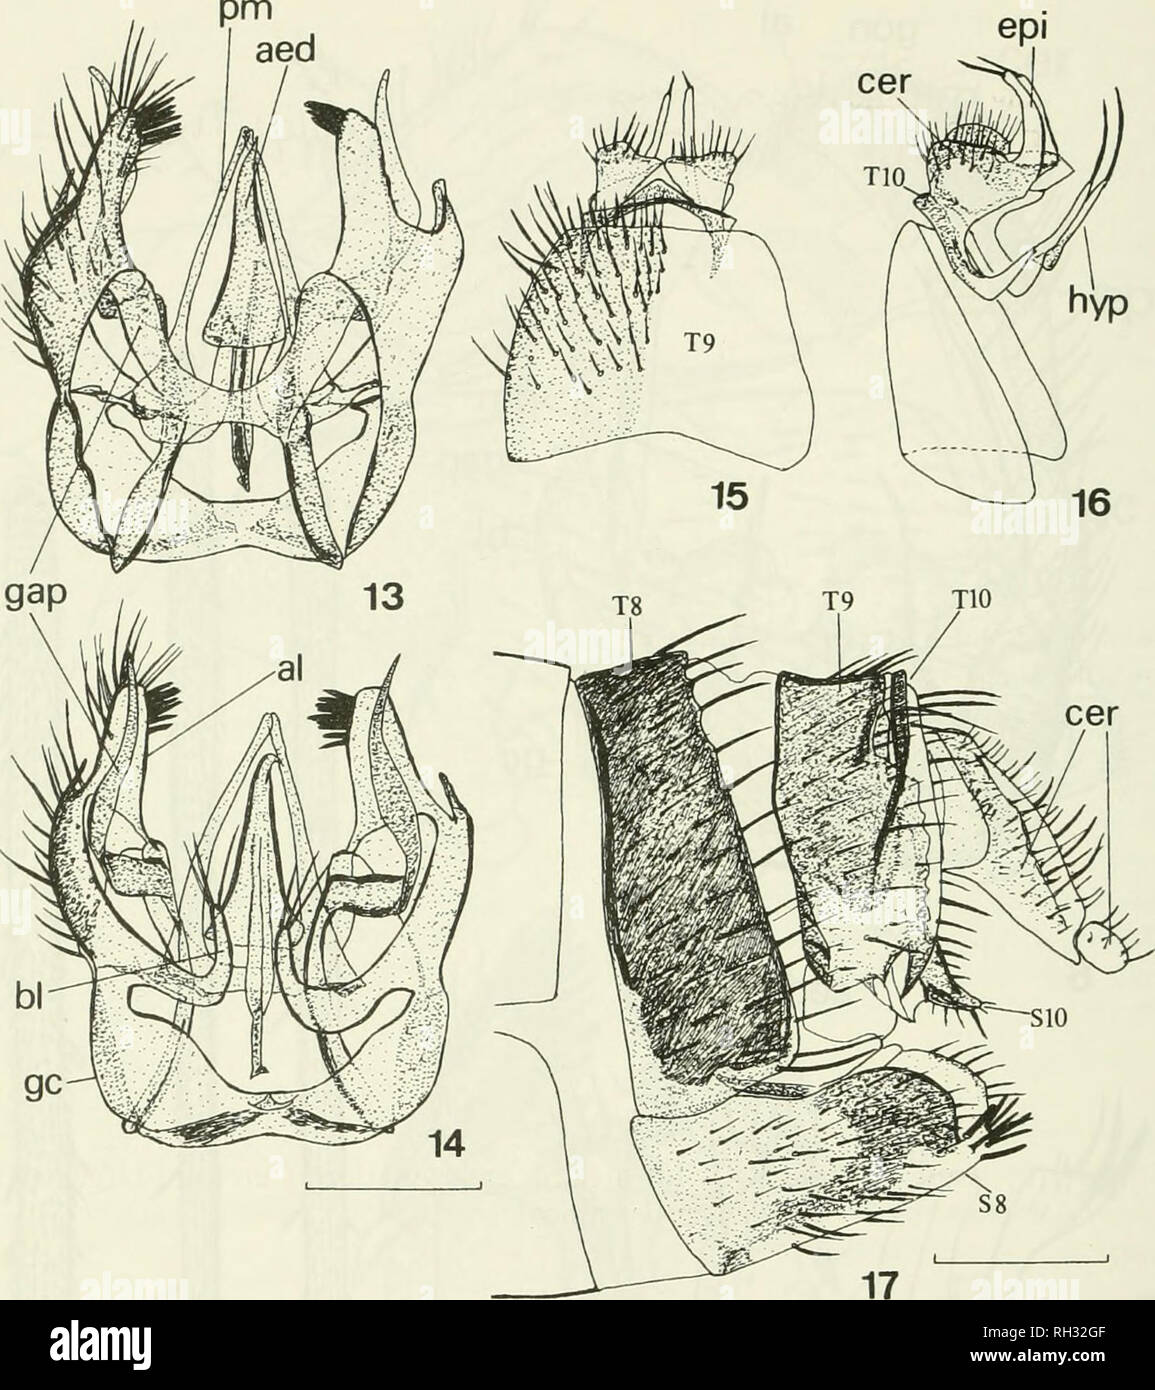 . British journal of entomology and natural history. Natural history; Entomology. BR. J. ENT. NAT. HIST.. 12: 1999. Figs 13-17. Grzegorzekia coUaris (Meigen): 13-16, male genitalia: 13, dorsal view of gonocoxites, aedeagus and parameres; 14, ventral view of gonocoxites, aedeagus and parameres; 15, dorsal view of tergites 9-10 and cerci; 16, lateral view of cerci and proctiger. 17, ovipositor, lateral view. Abbreviations: as Figs 4-6 and hyp = hypoproct, S = sternite. Scale line 0.25 mm. Creagdhubhia mallochorum sp. n. (Figs 2, 4-10) Male. Head dark grey with pale setae. Antenna as long as the  Stock Photo